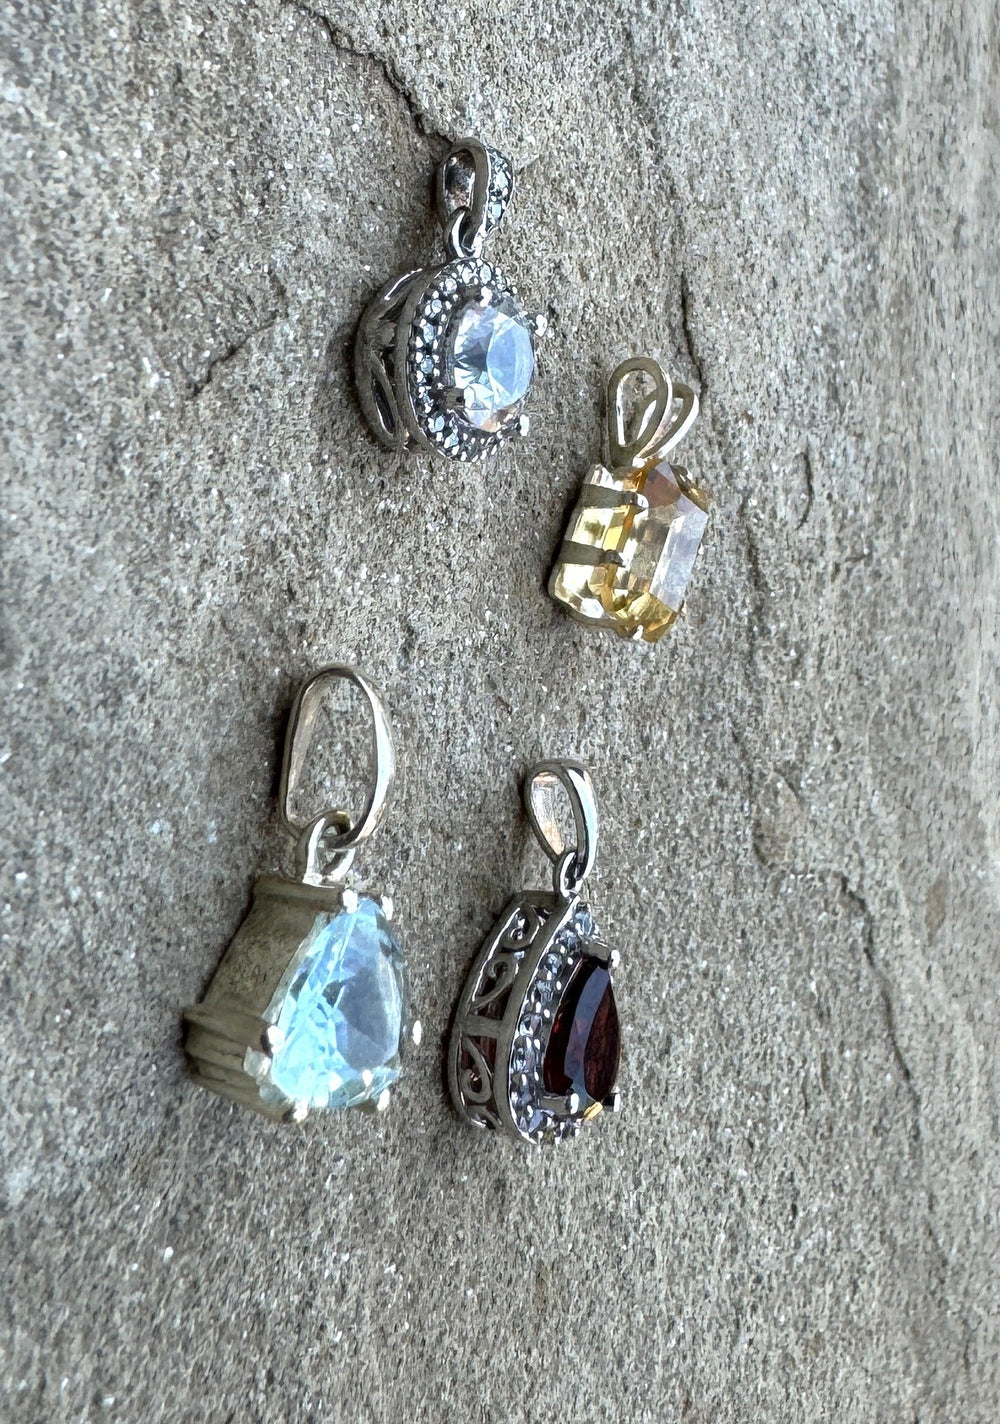 Tiny Sterling Silver Pendant with Faceted Stones See